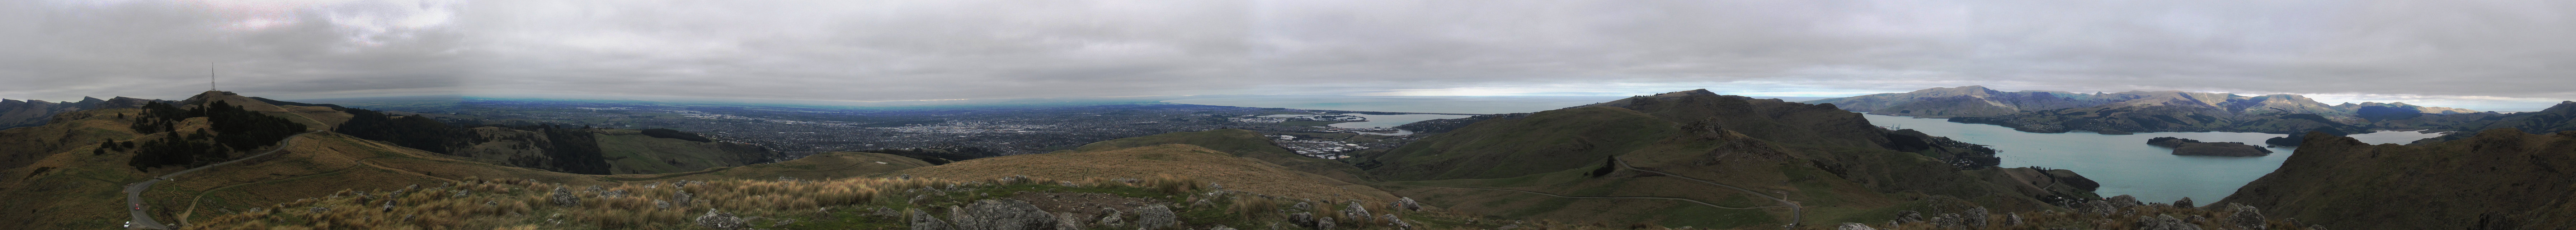 Christchurch and Lyttelton from Mt Vernon (462m)